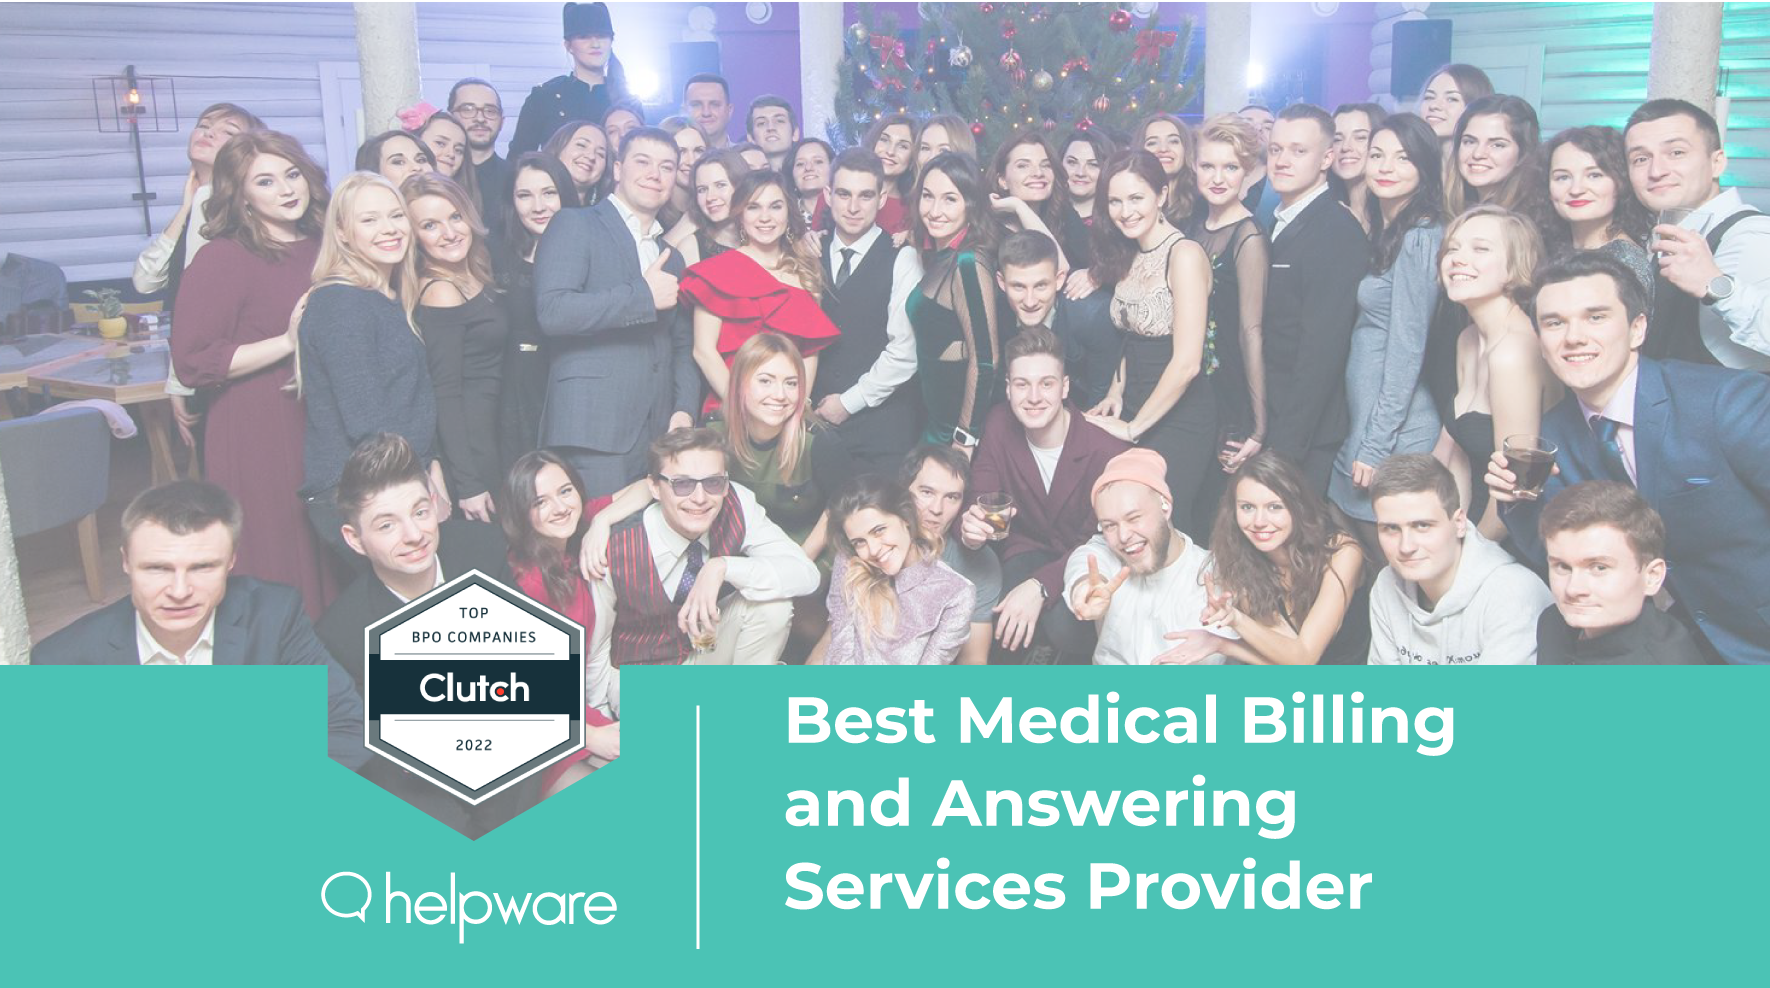 Helpware Leads the Way to the Top of Clutch’s Anual Awards 2022 for Medical Billing and Answering Services